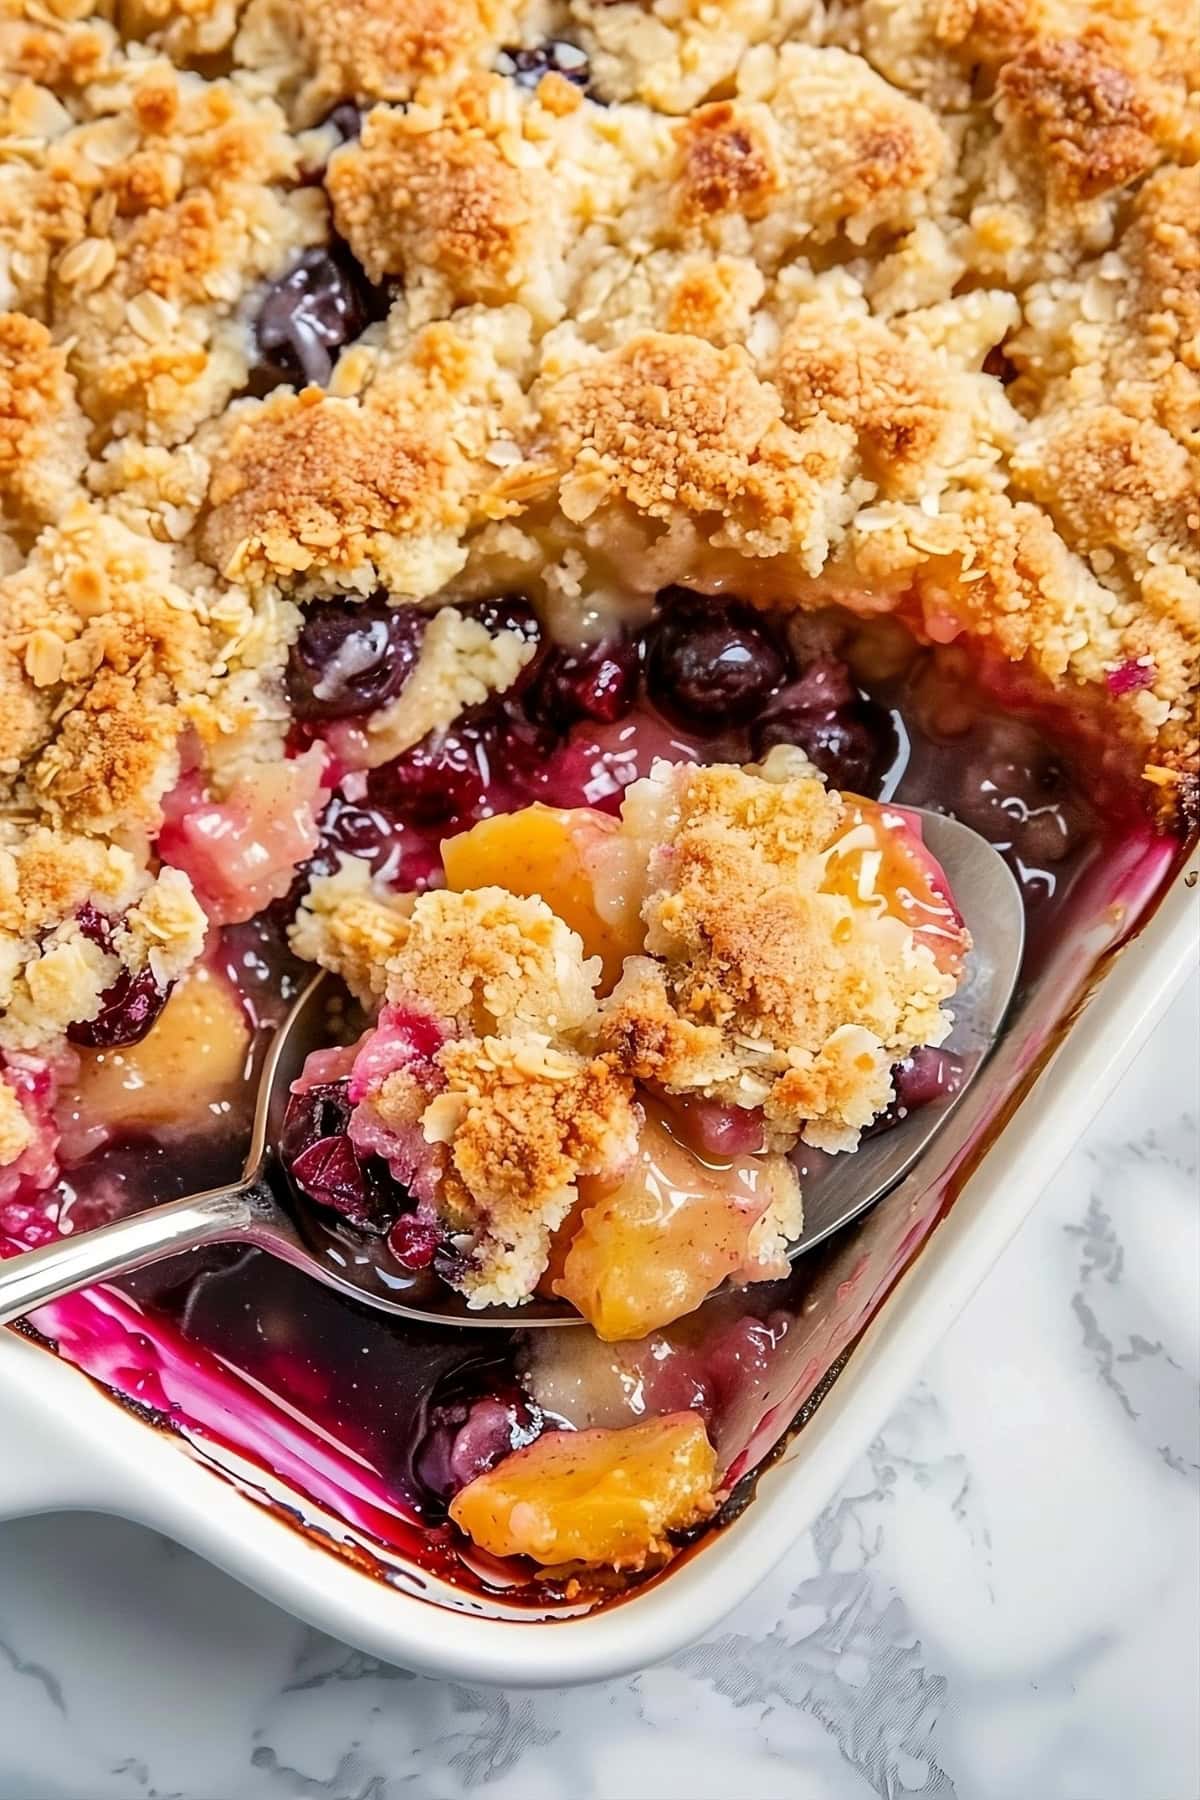 Peach and blueberry cobbler in a baking dish scooped by a spoon.